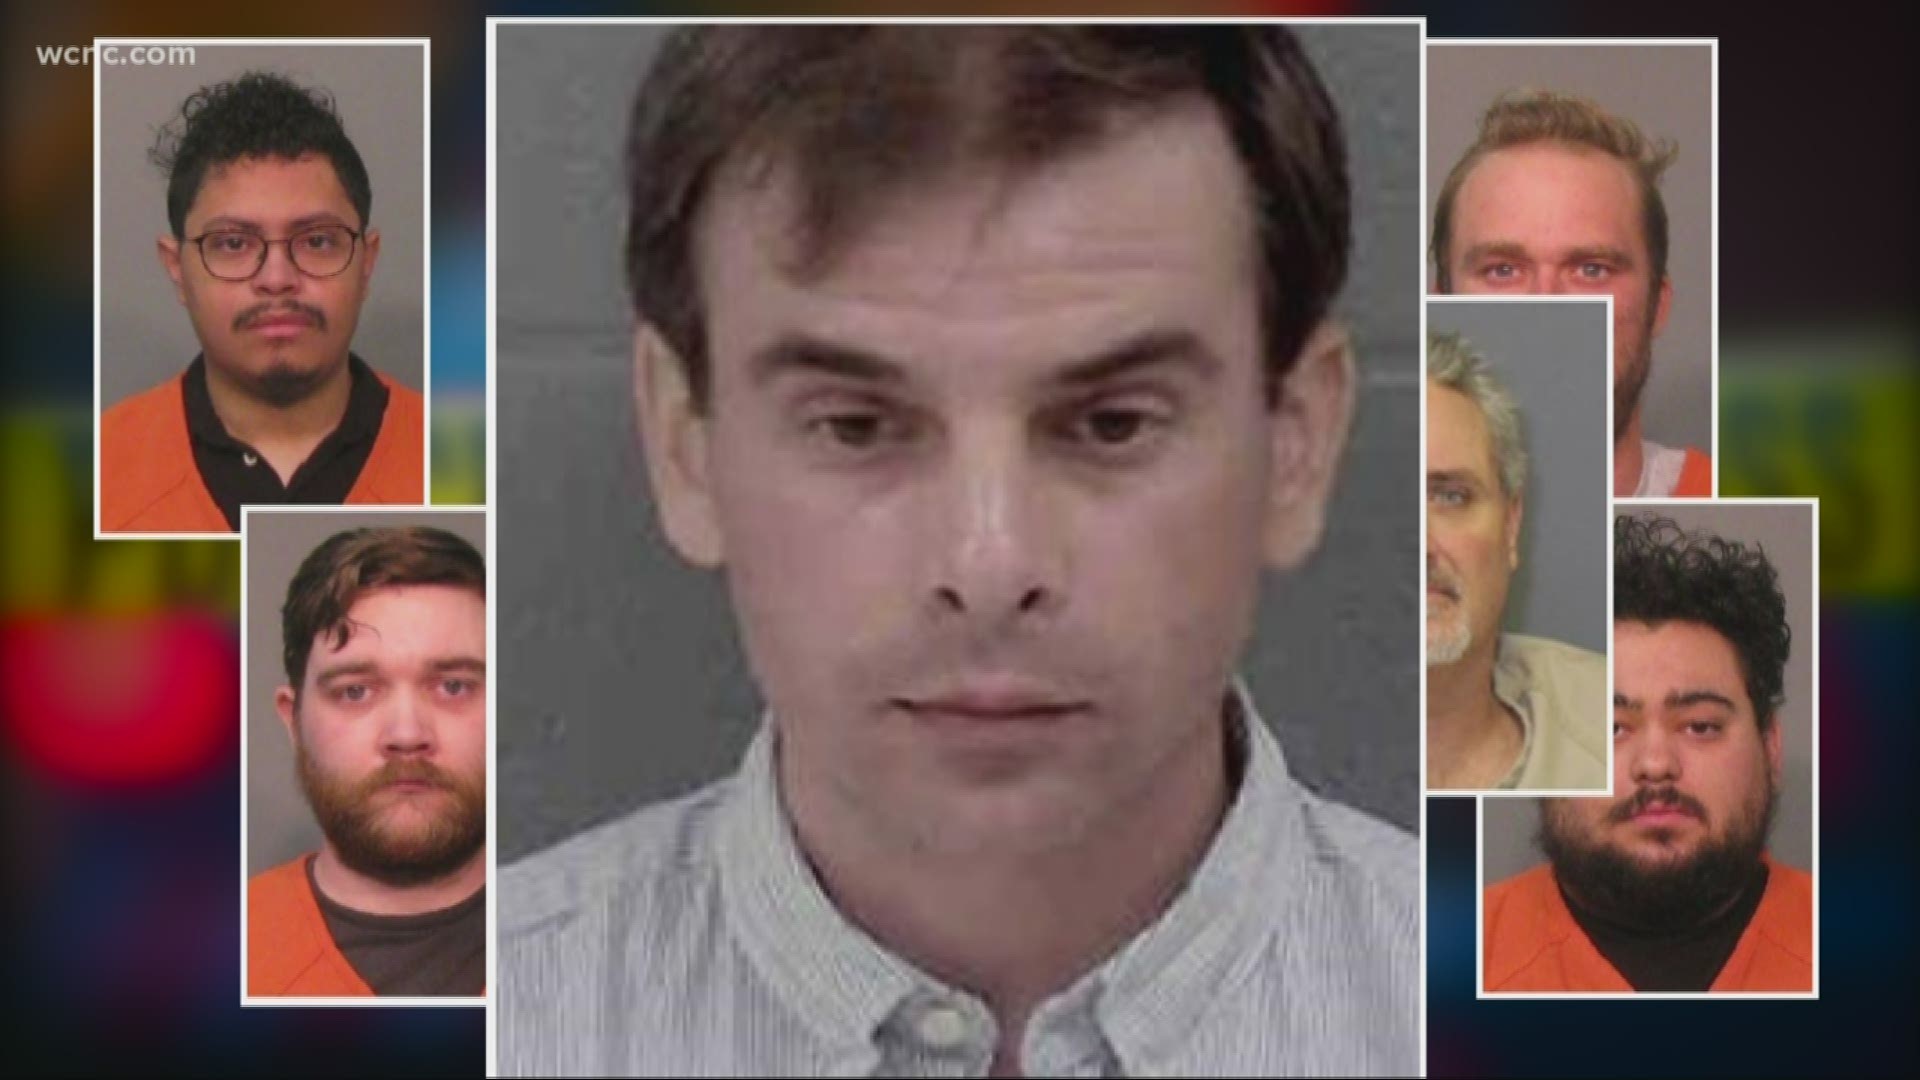 After a multi-week operation, 10 men have been arrested and accused of child exploitation. One of the men accused is a former DavidsonCollege professor.